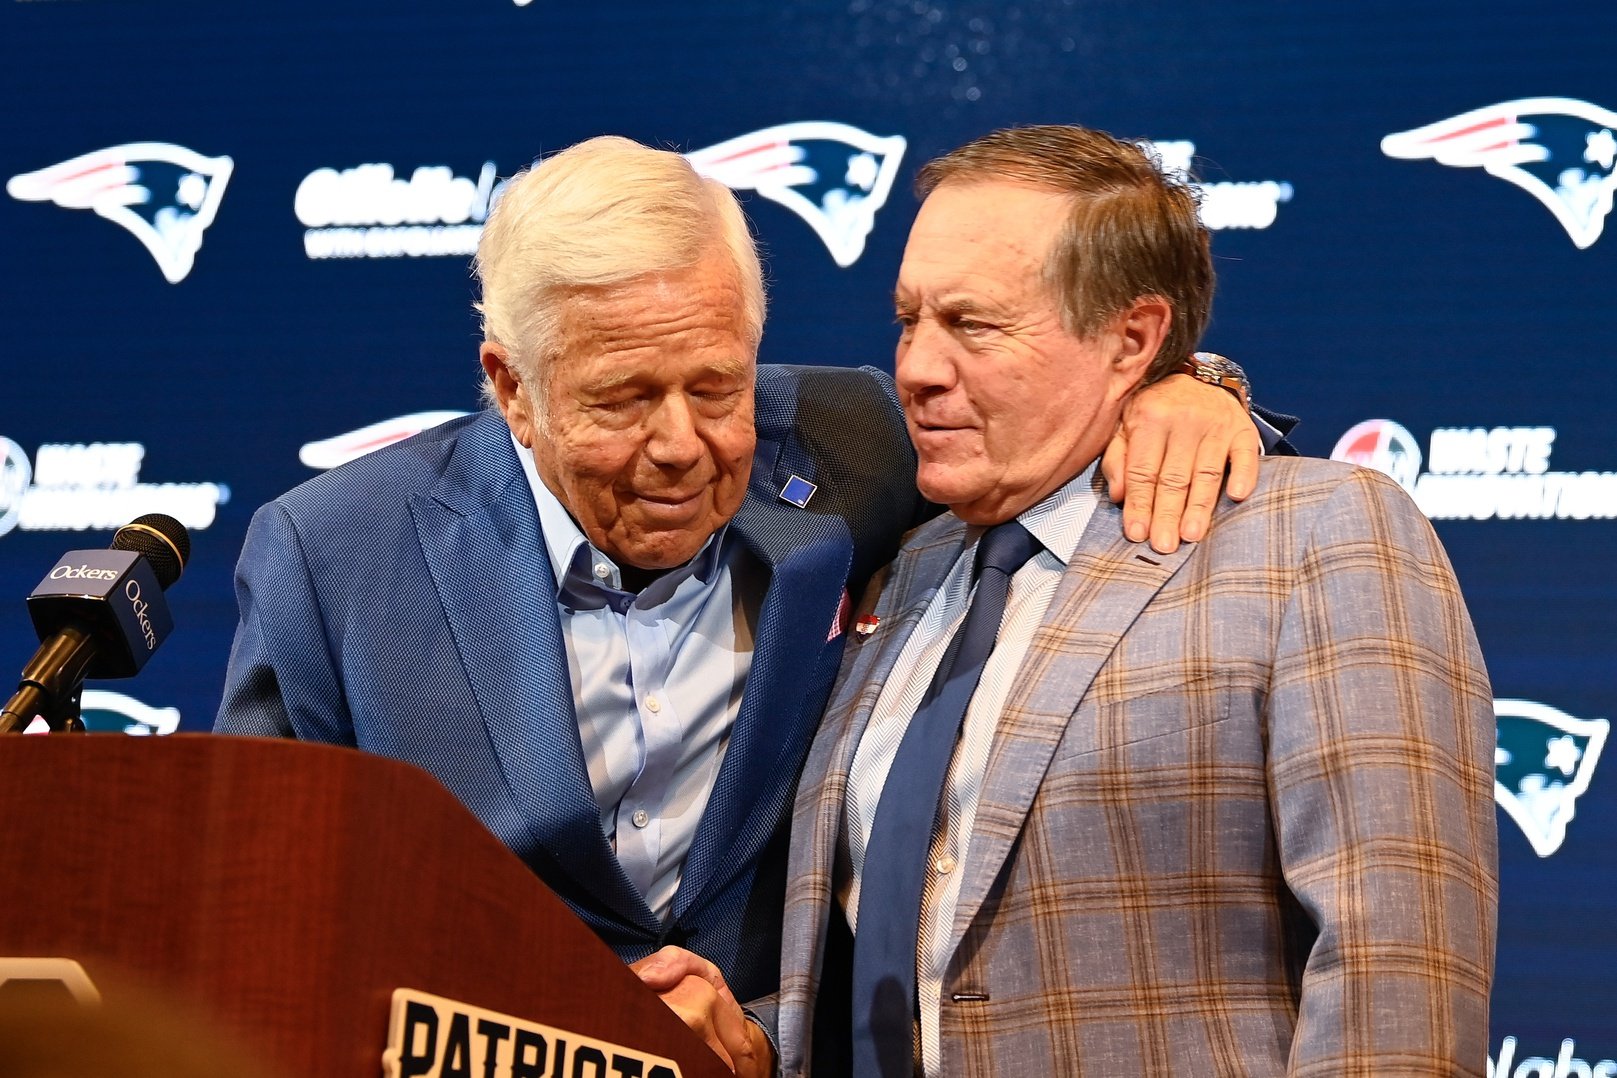 New England Patriots former head coach Bill Belichick (right) embraces Patriots owner Robert Kraft (left) during a press conference at Gillette Stadium to announce Belichick's exit from the team.